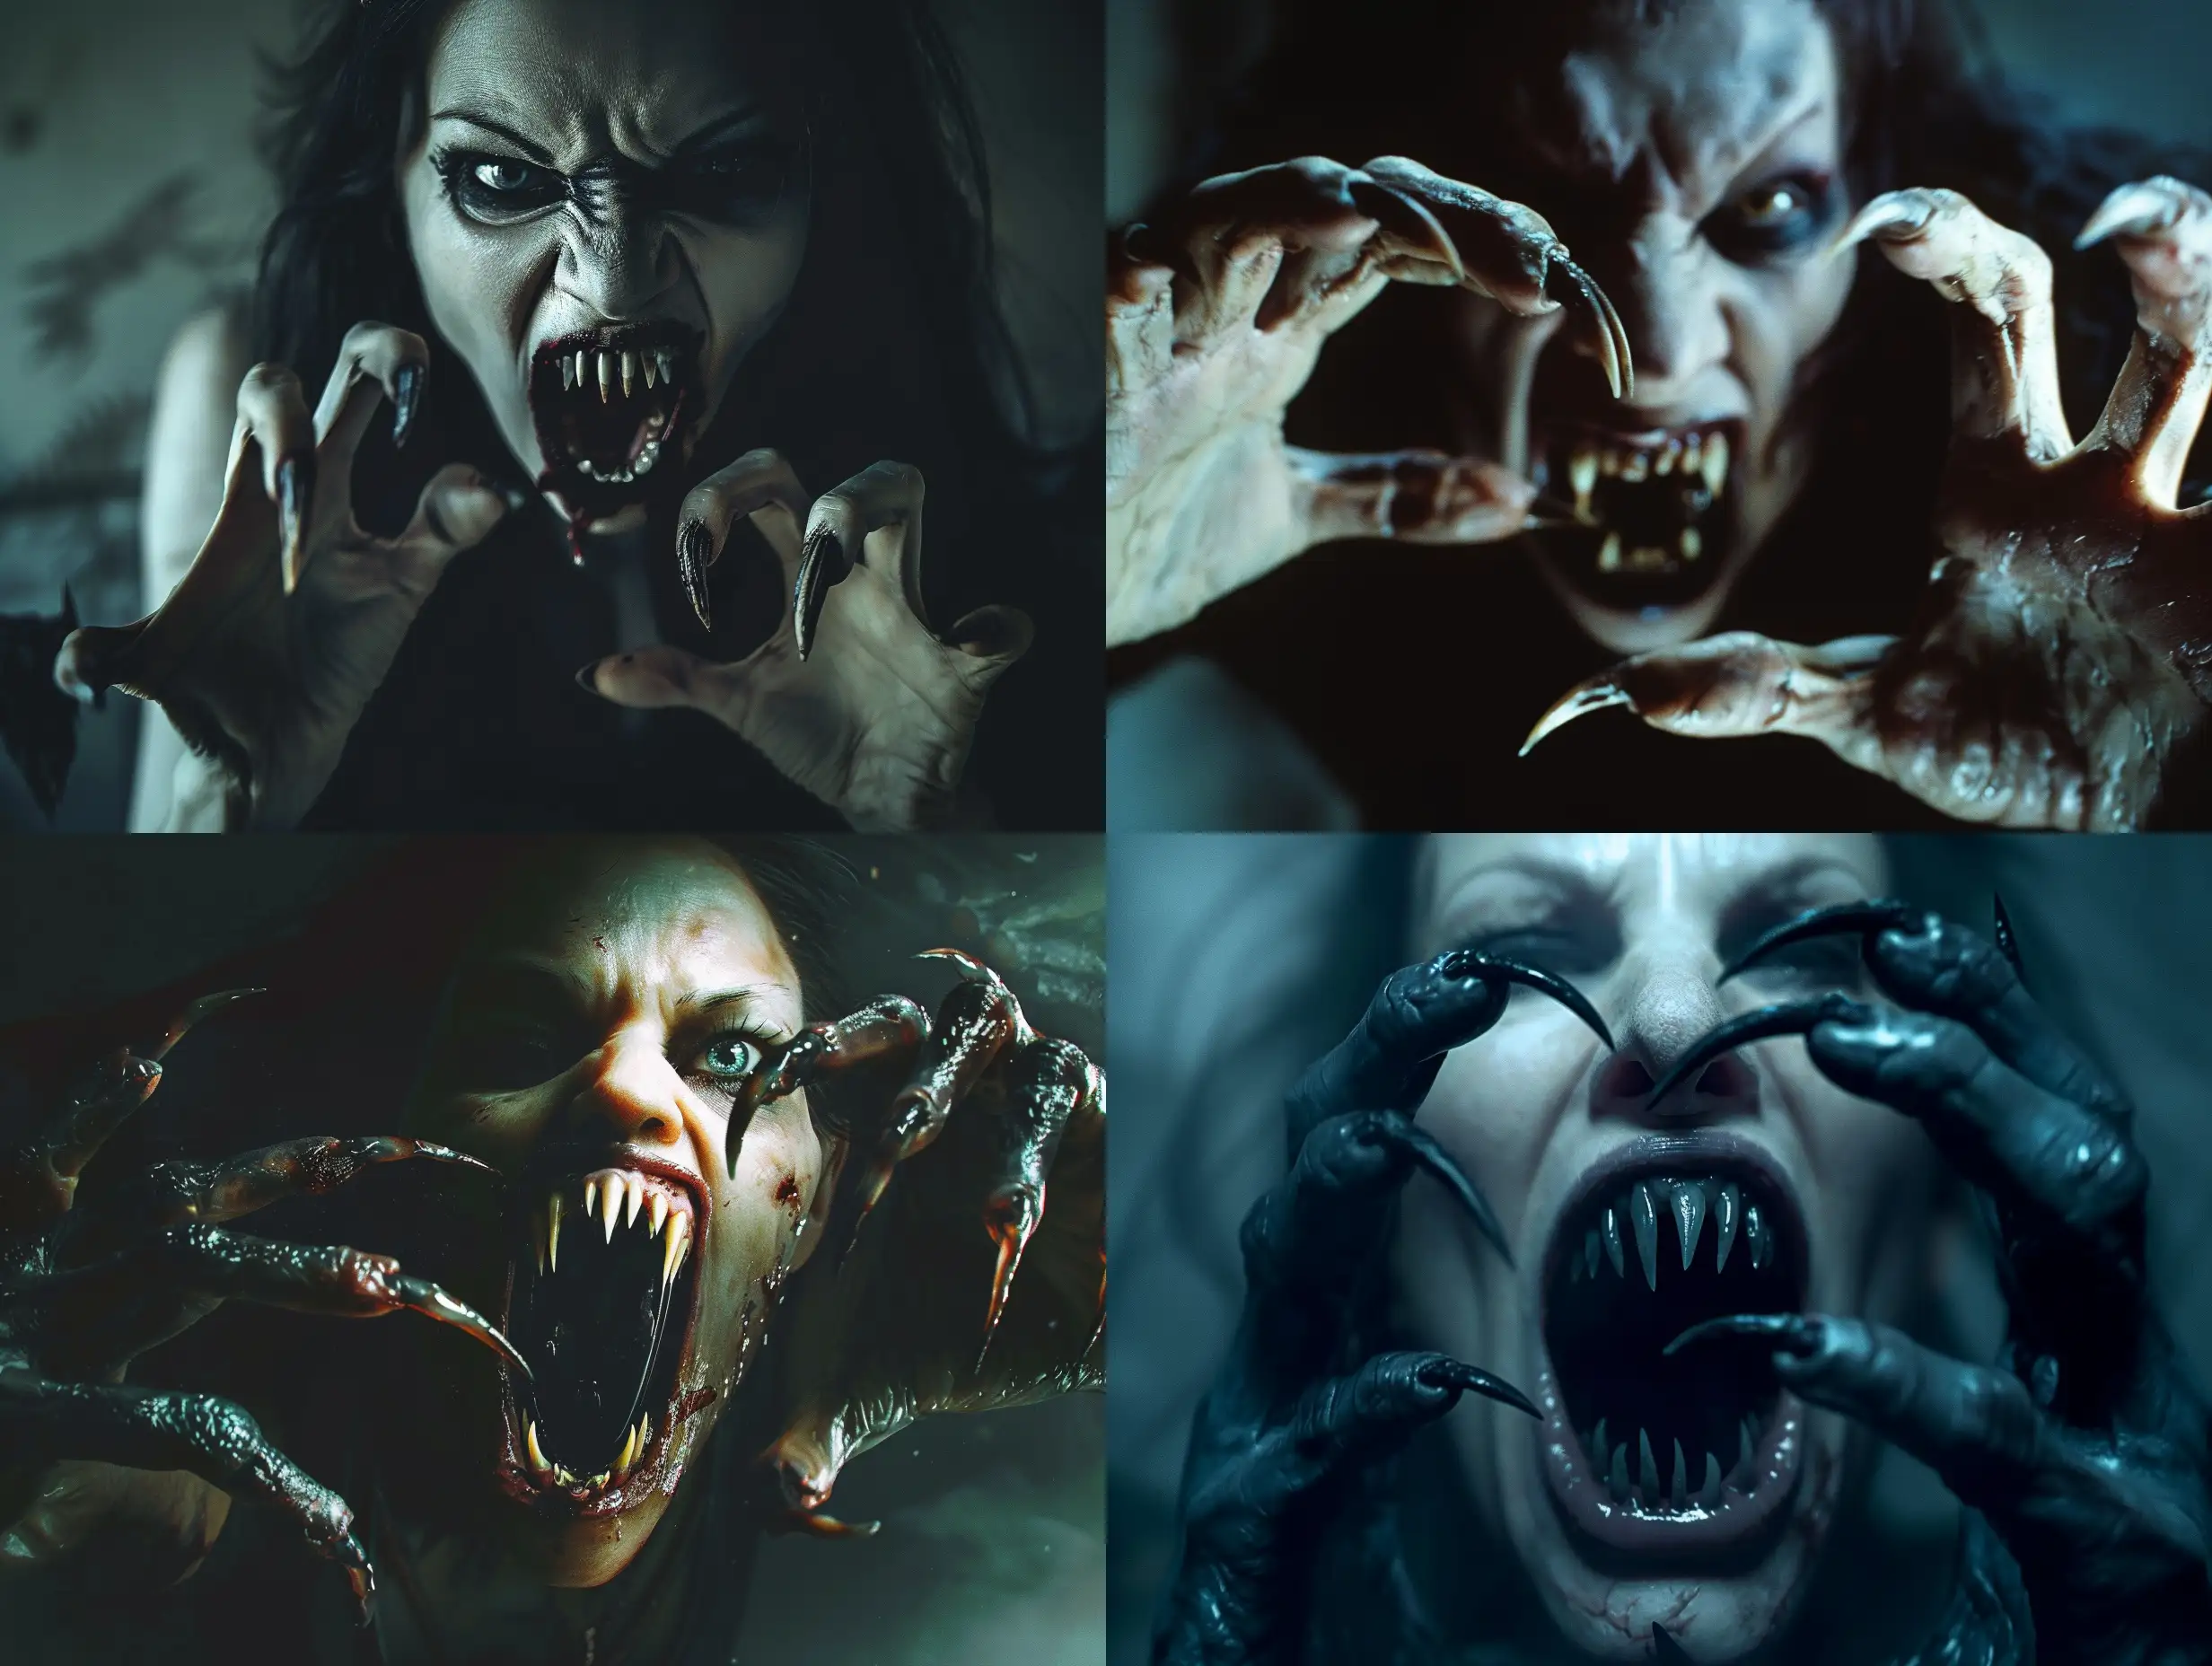 A photorealistic scene of a wild, monstrous vampire woman emerging from the darkness, her menacing mouth open to reveal terrifying fangs. Her extra-long pointed fingernails resemble the claws of a predator, adding to the horror of her appearance. The scene is set in a hauntingly dark room, with atmospheric lighting intensifying the eerie and creepy atmosphere. Every detail, from the texture of her nails to the anatomical precision of her hands, is meticulously depicted in high detail. The hyper-realism and cinematic quality of the image bring out the full terror of this undead creature, making it a nightmare-inducing and grotesque depiction. The vampire's aggressive and threatening presence is captured with intense realism, ensuring that every aspect of this photorealistic horror scene is as terrifying as it